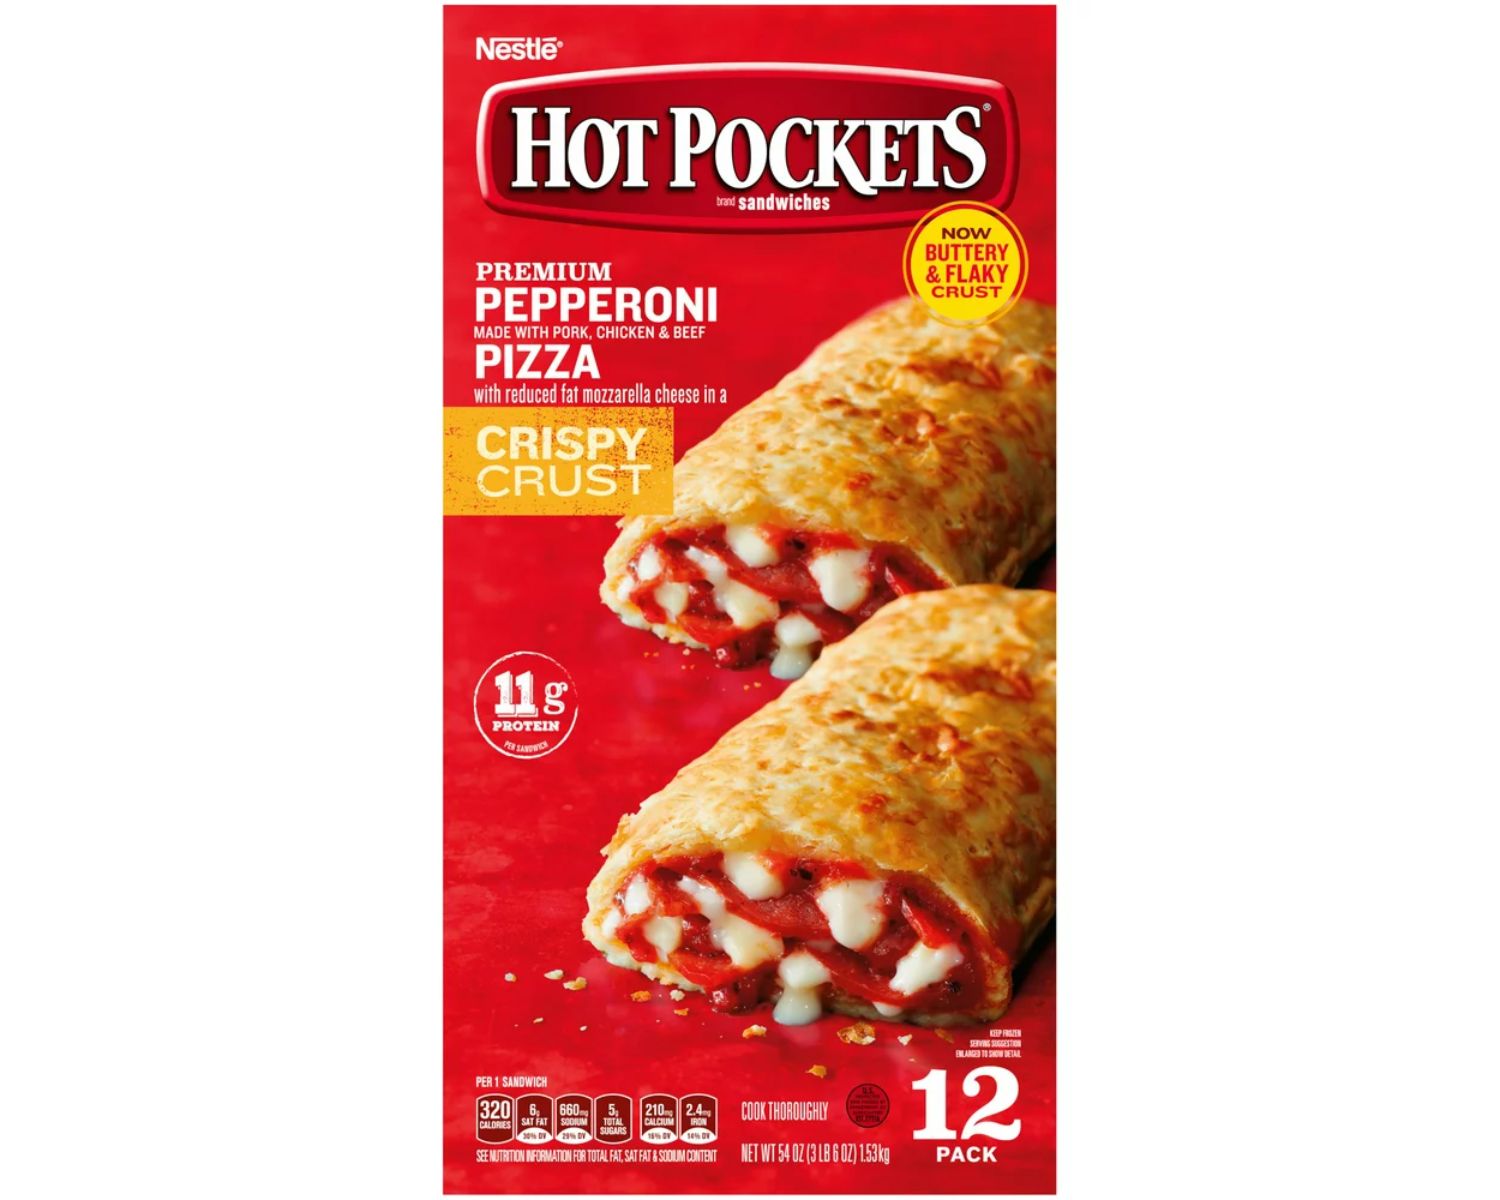 15-pepperoni-hot-pocket-nutrition-facts